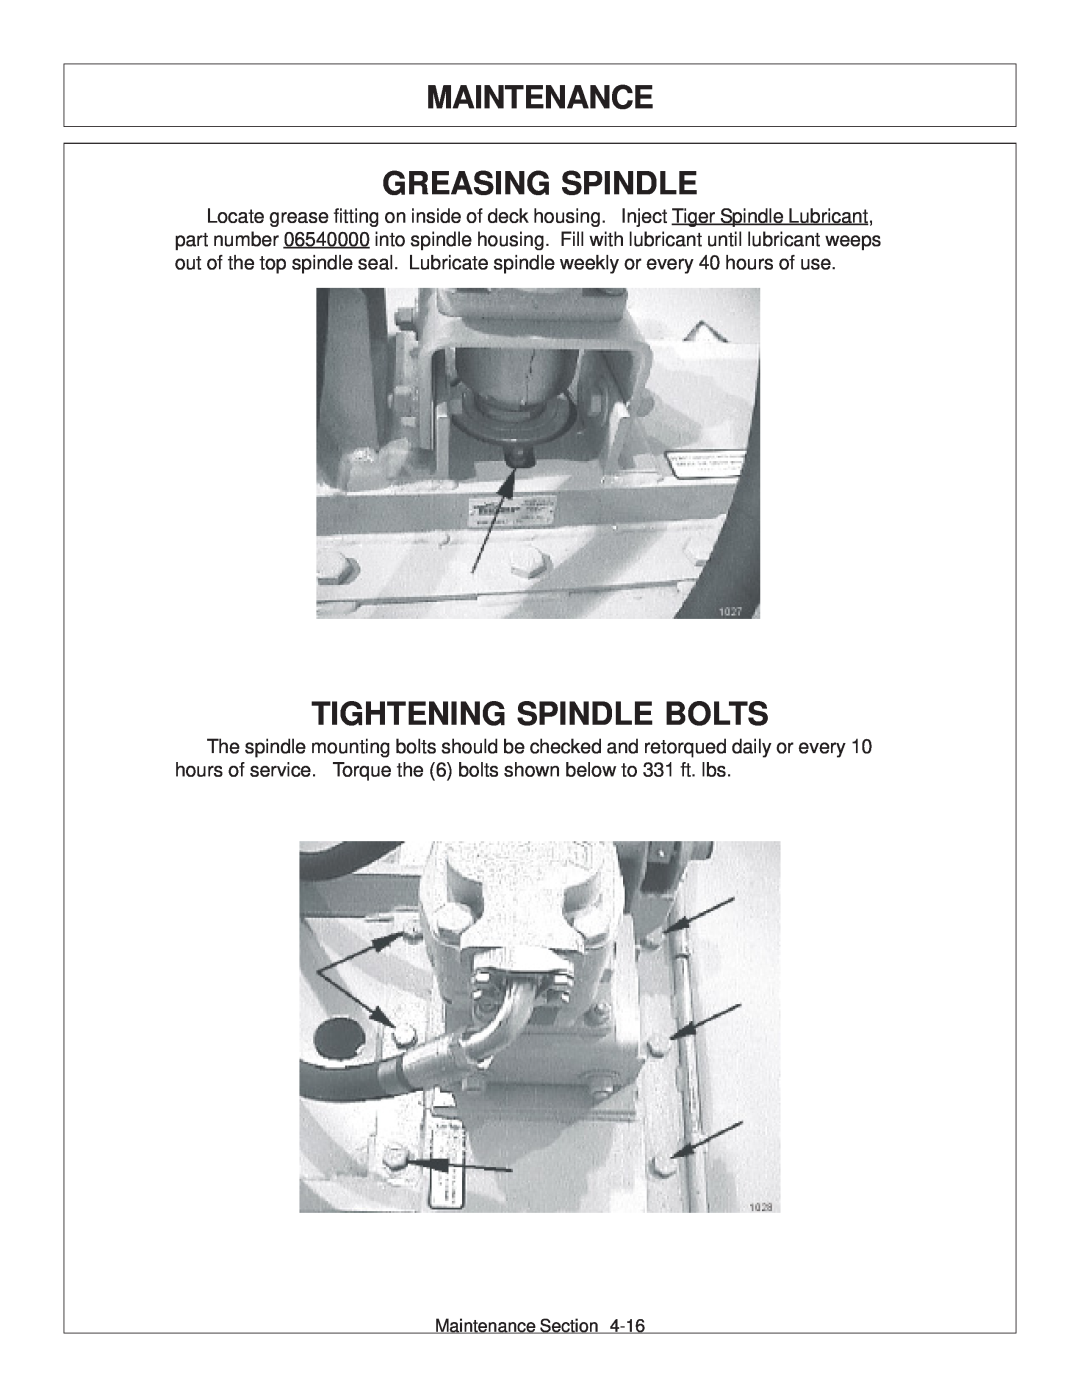 Tiger Products Co., Ltd JD 72-7520 manual Maintenance Greasing Spindle, Tightening Spindle Bolts 